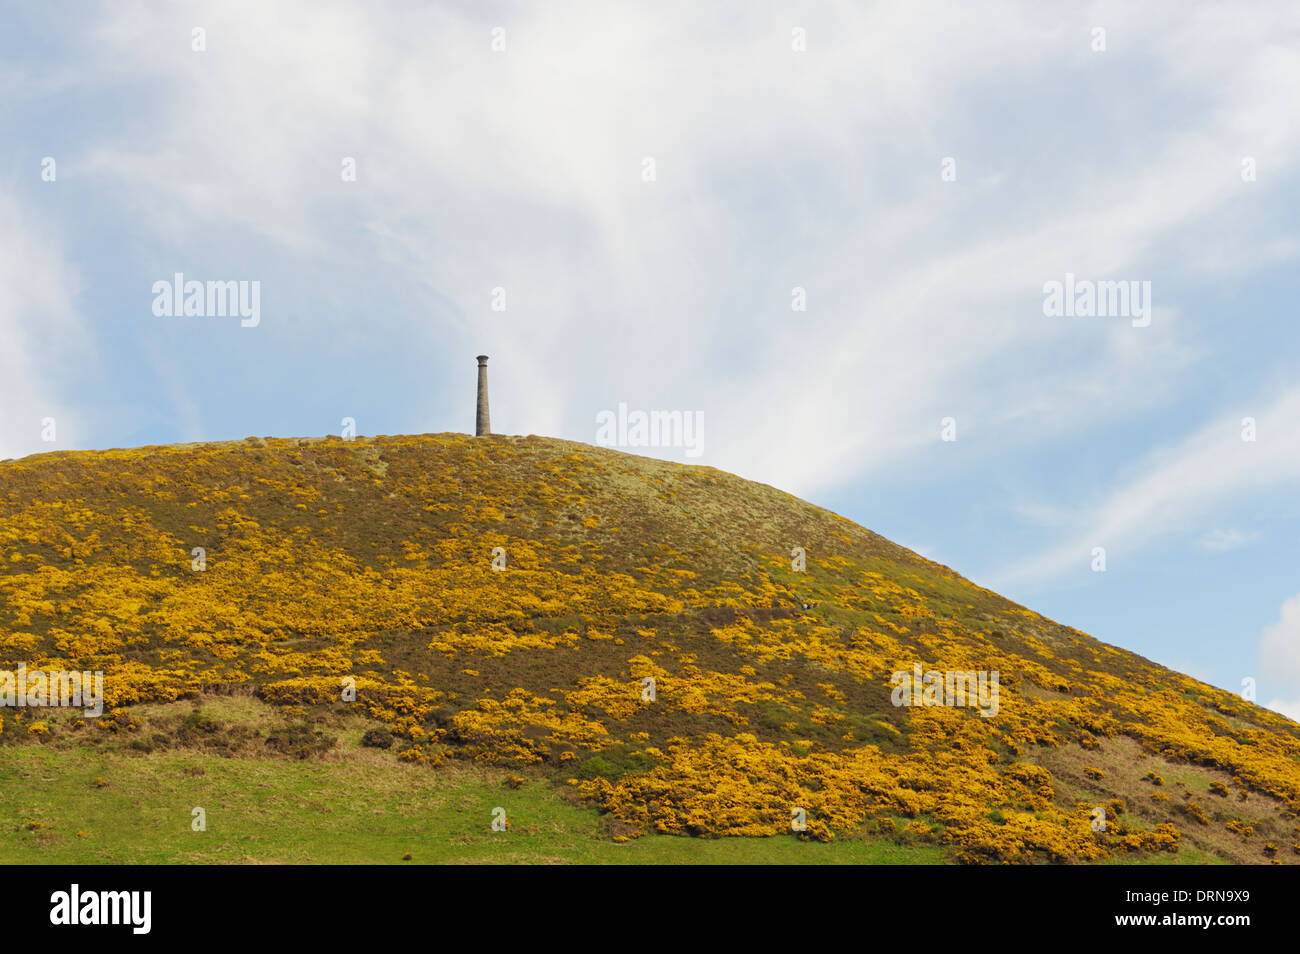 Pen Dinas nature reserve, covered with flowering Gorse Ulex europea in Spring, Aberystwyth, Wales, UK Stock Photo